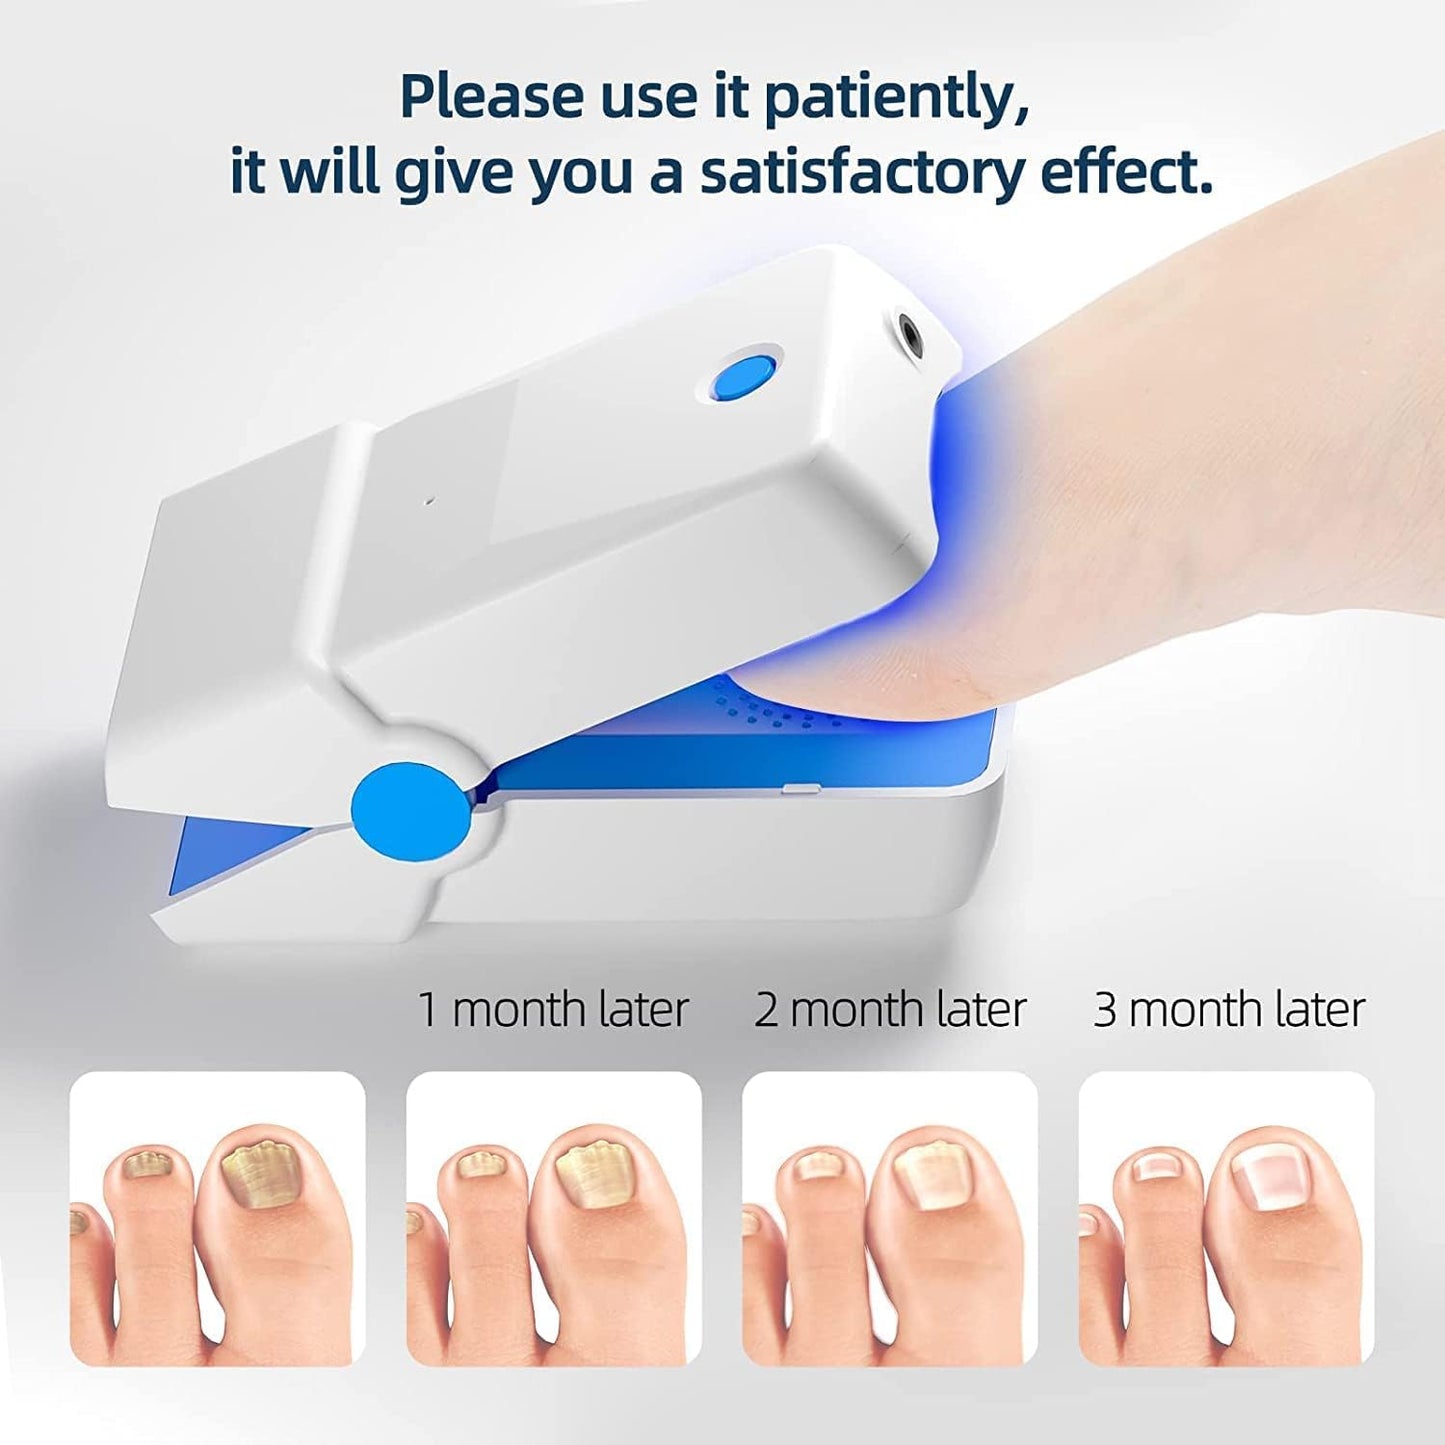 Highly Effective Cherrish Rechargeable Cherrish Nail Fungus Laser Treatment Device for Onychomycosis Cure. This Instrument is for Home use and Treats Nail Fungus and infections. Easy use and Fast Results.